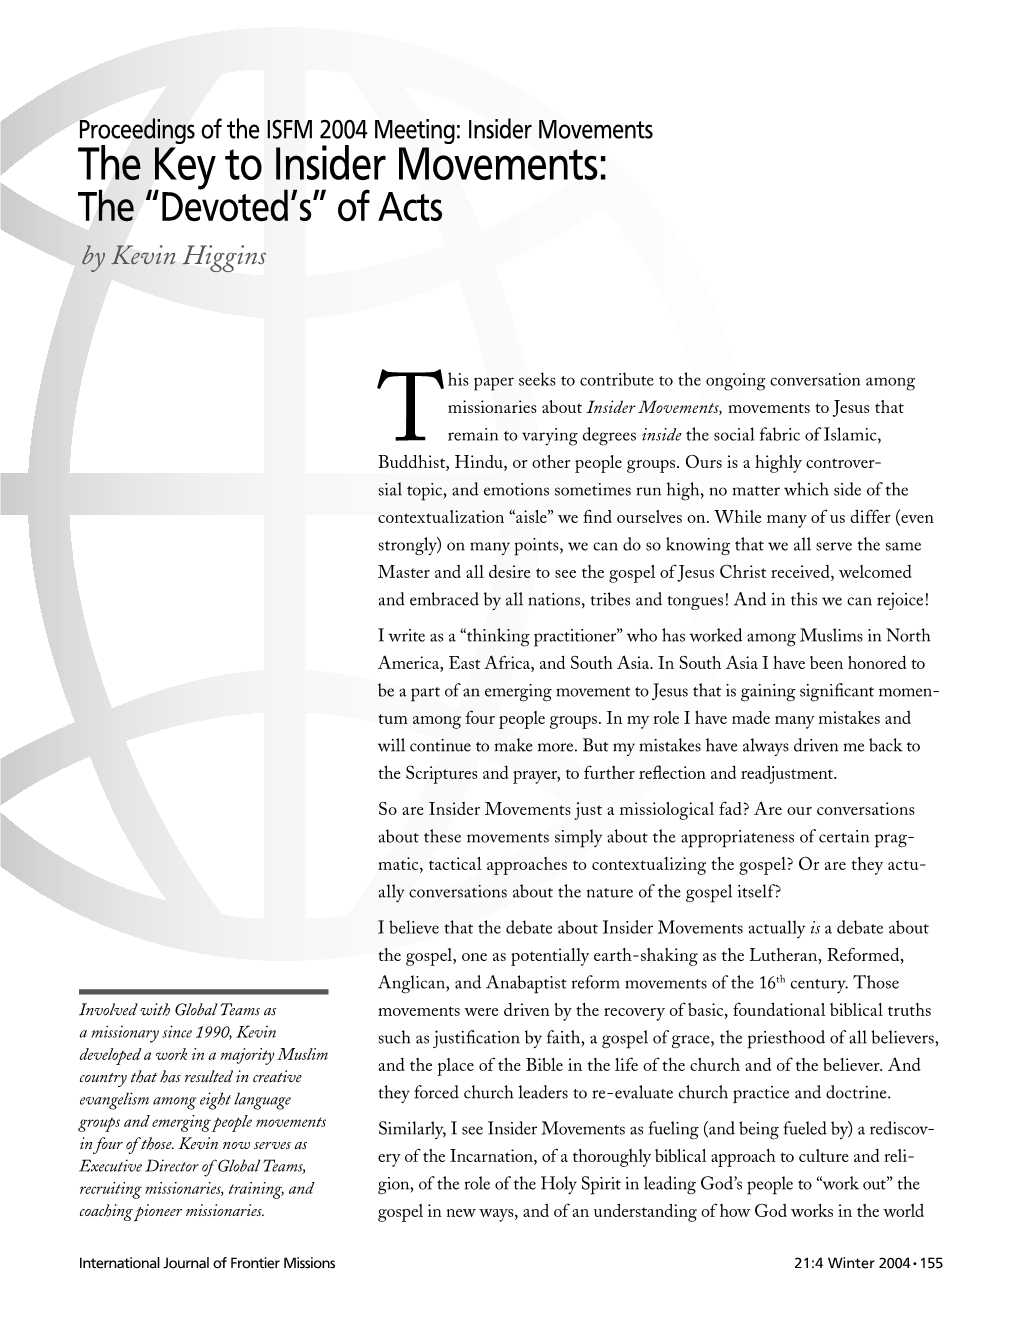 The Key to Insider Movements: the “Devoted’S” of Acts by Kevin Higgins